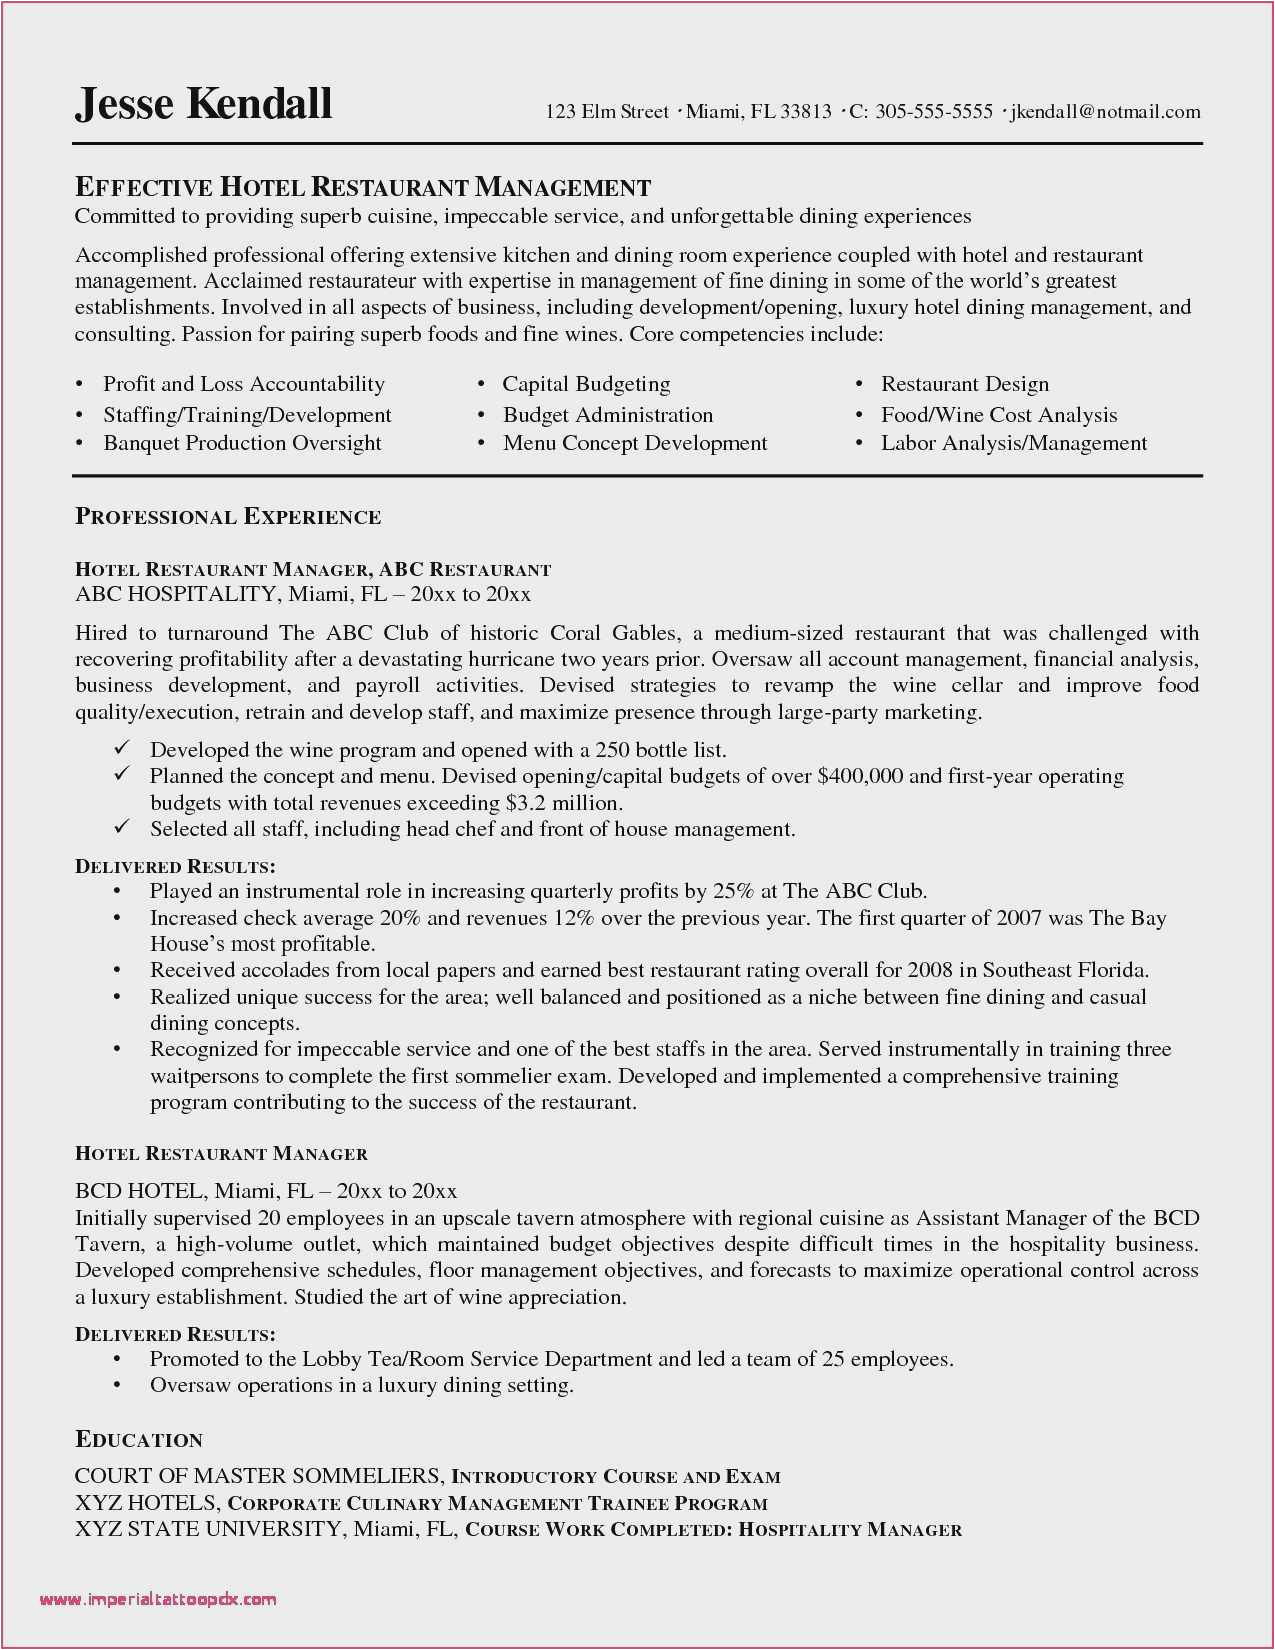 Sample Resume for Hotel and Restaurant Management Fresh Graduate Hotel Manager Resume Example 57 Picture